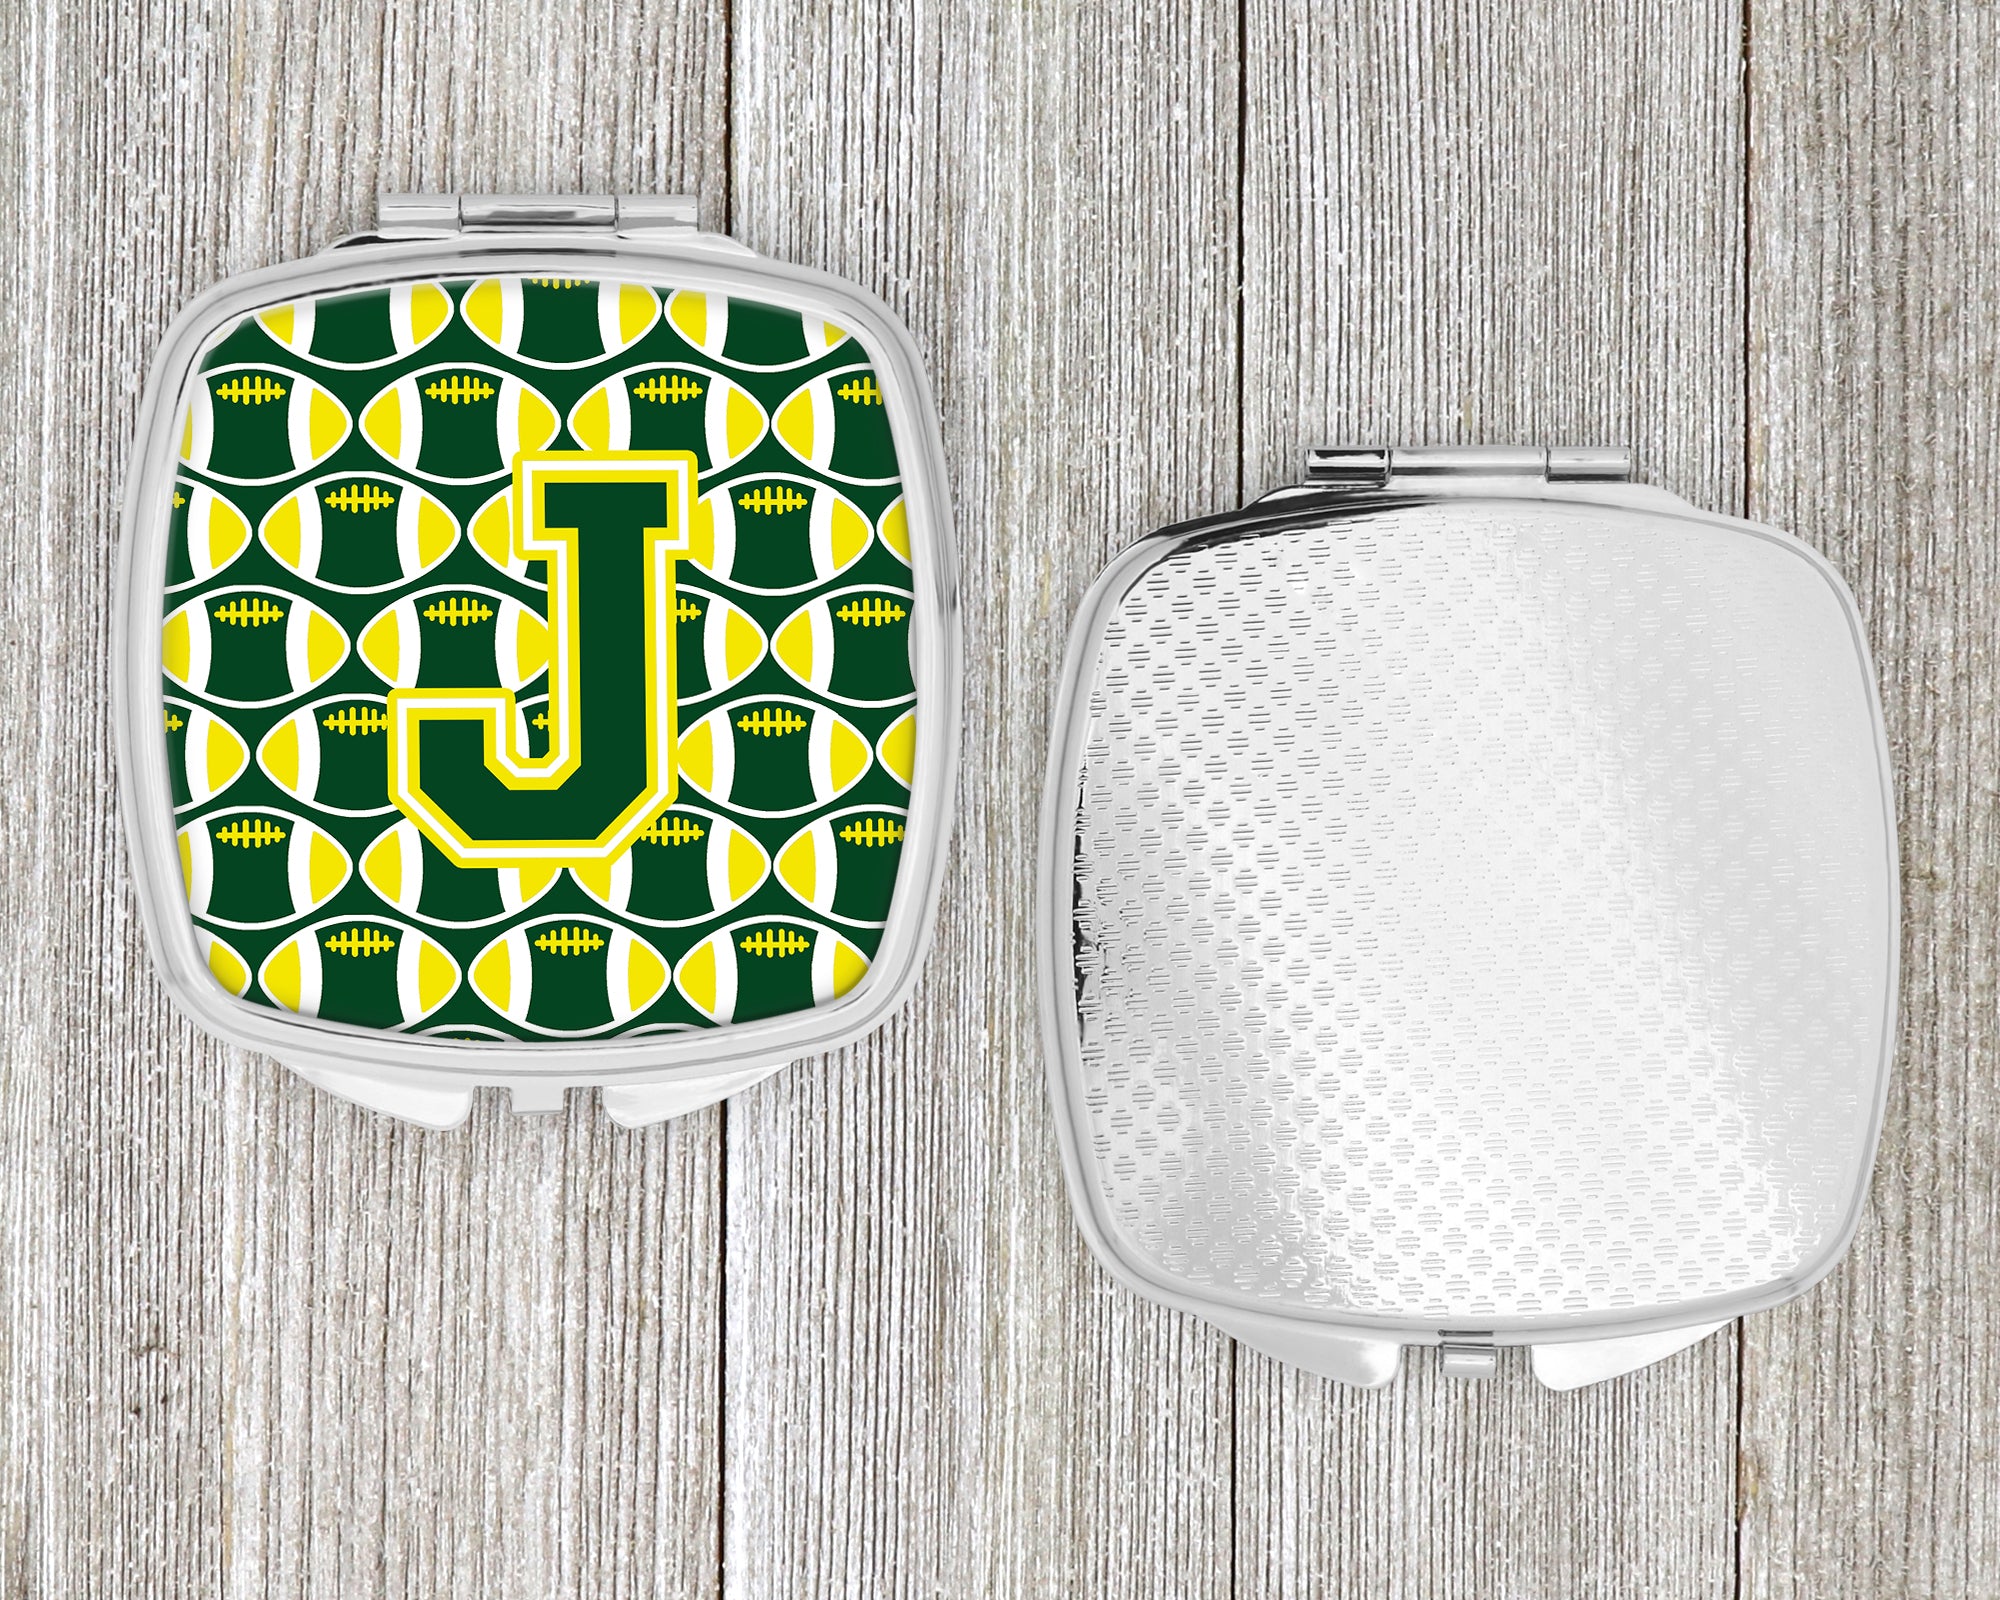 Letter J Football Green and Yellow Compact Mirror CJ1075-JSCM